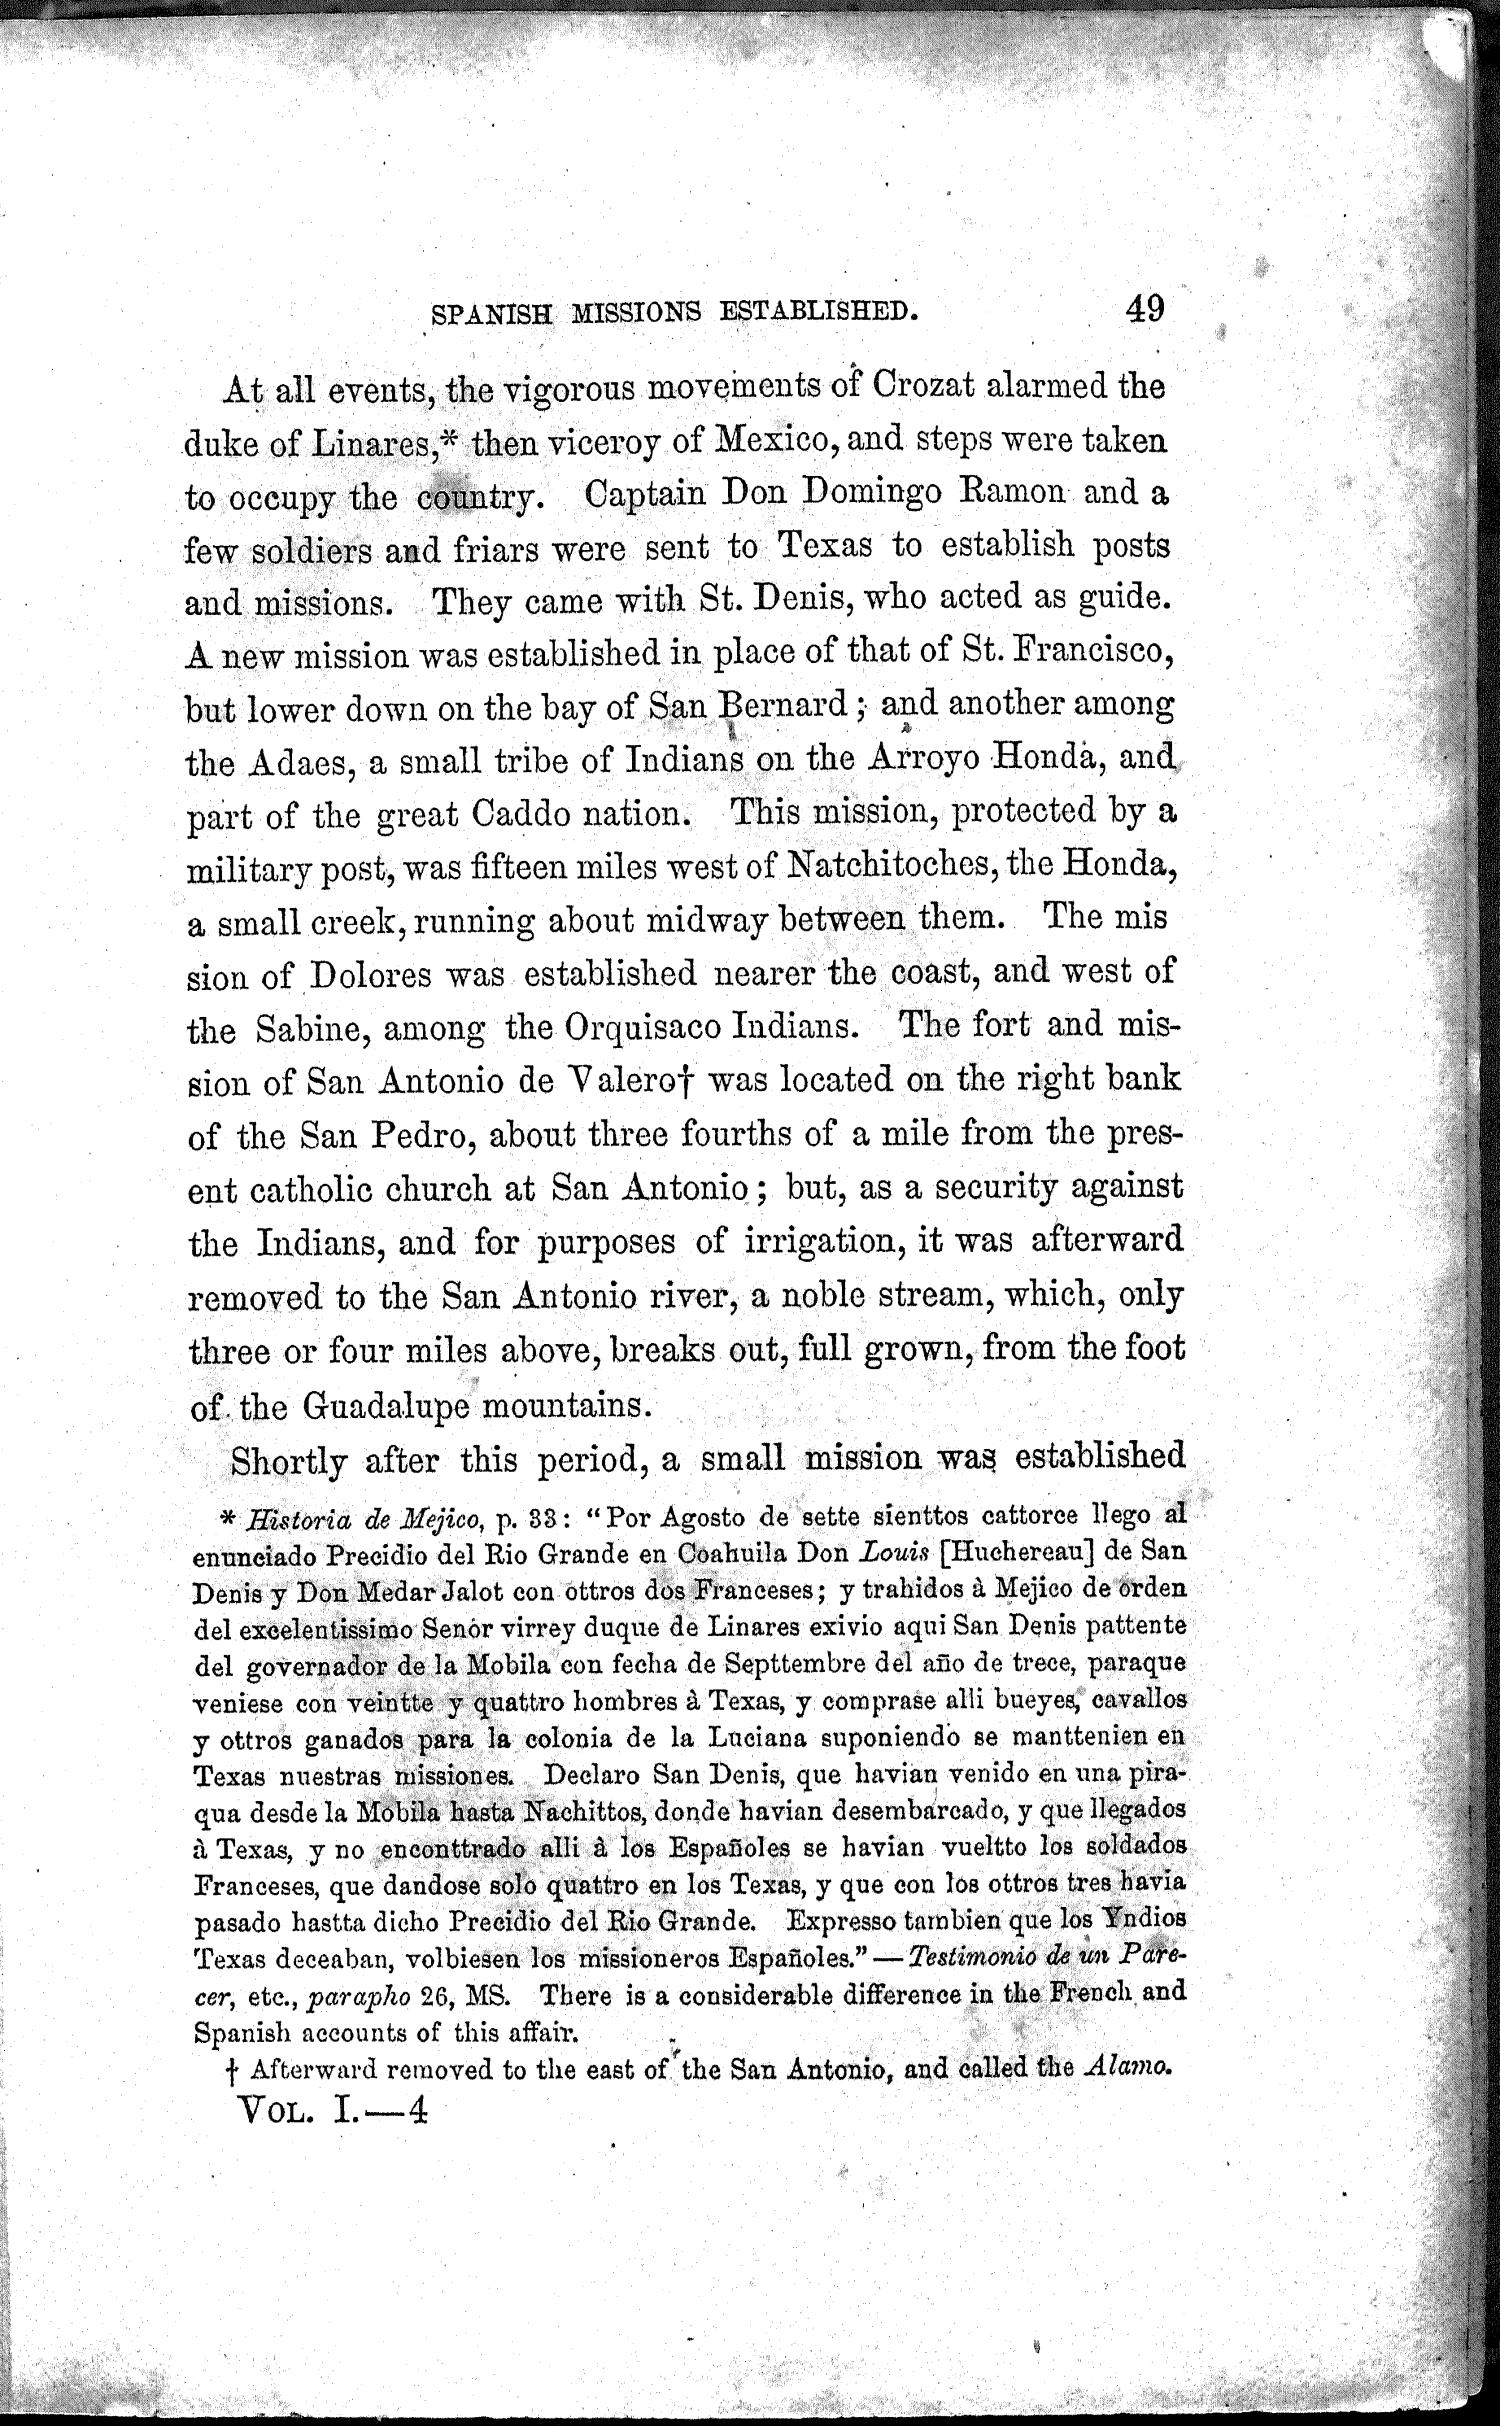 History of Texas: From Its First Settlement in 1685 to Its Annexation to the United States in 1846, Volume 1
                                                
                                                    49
                                                